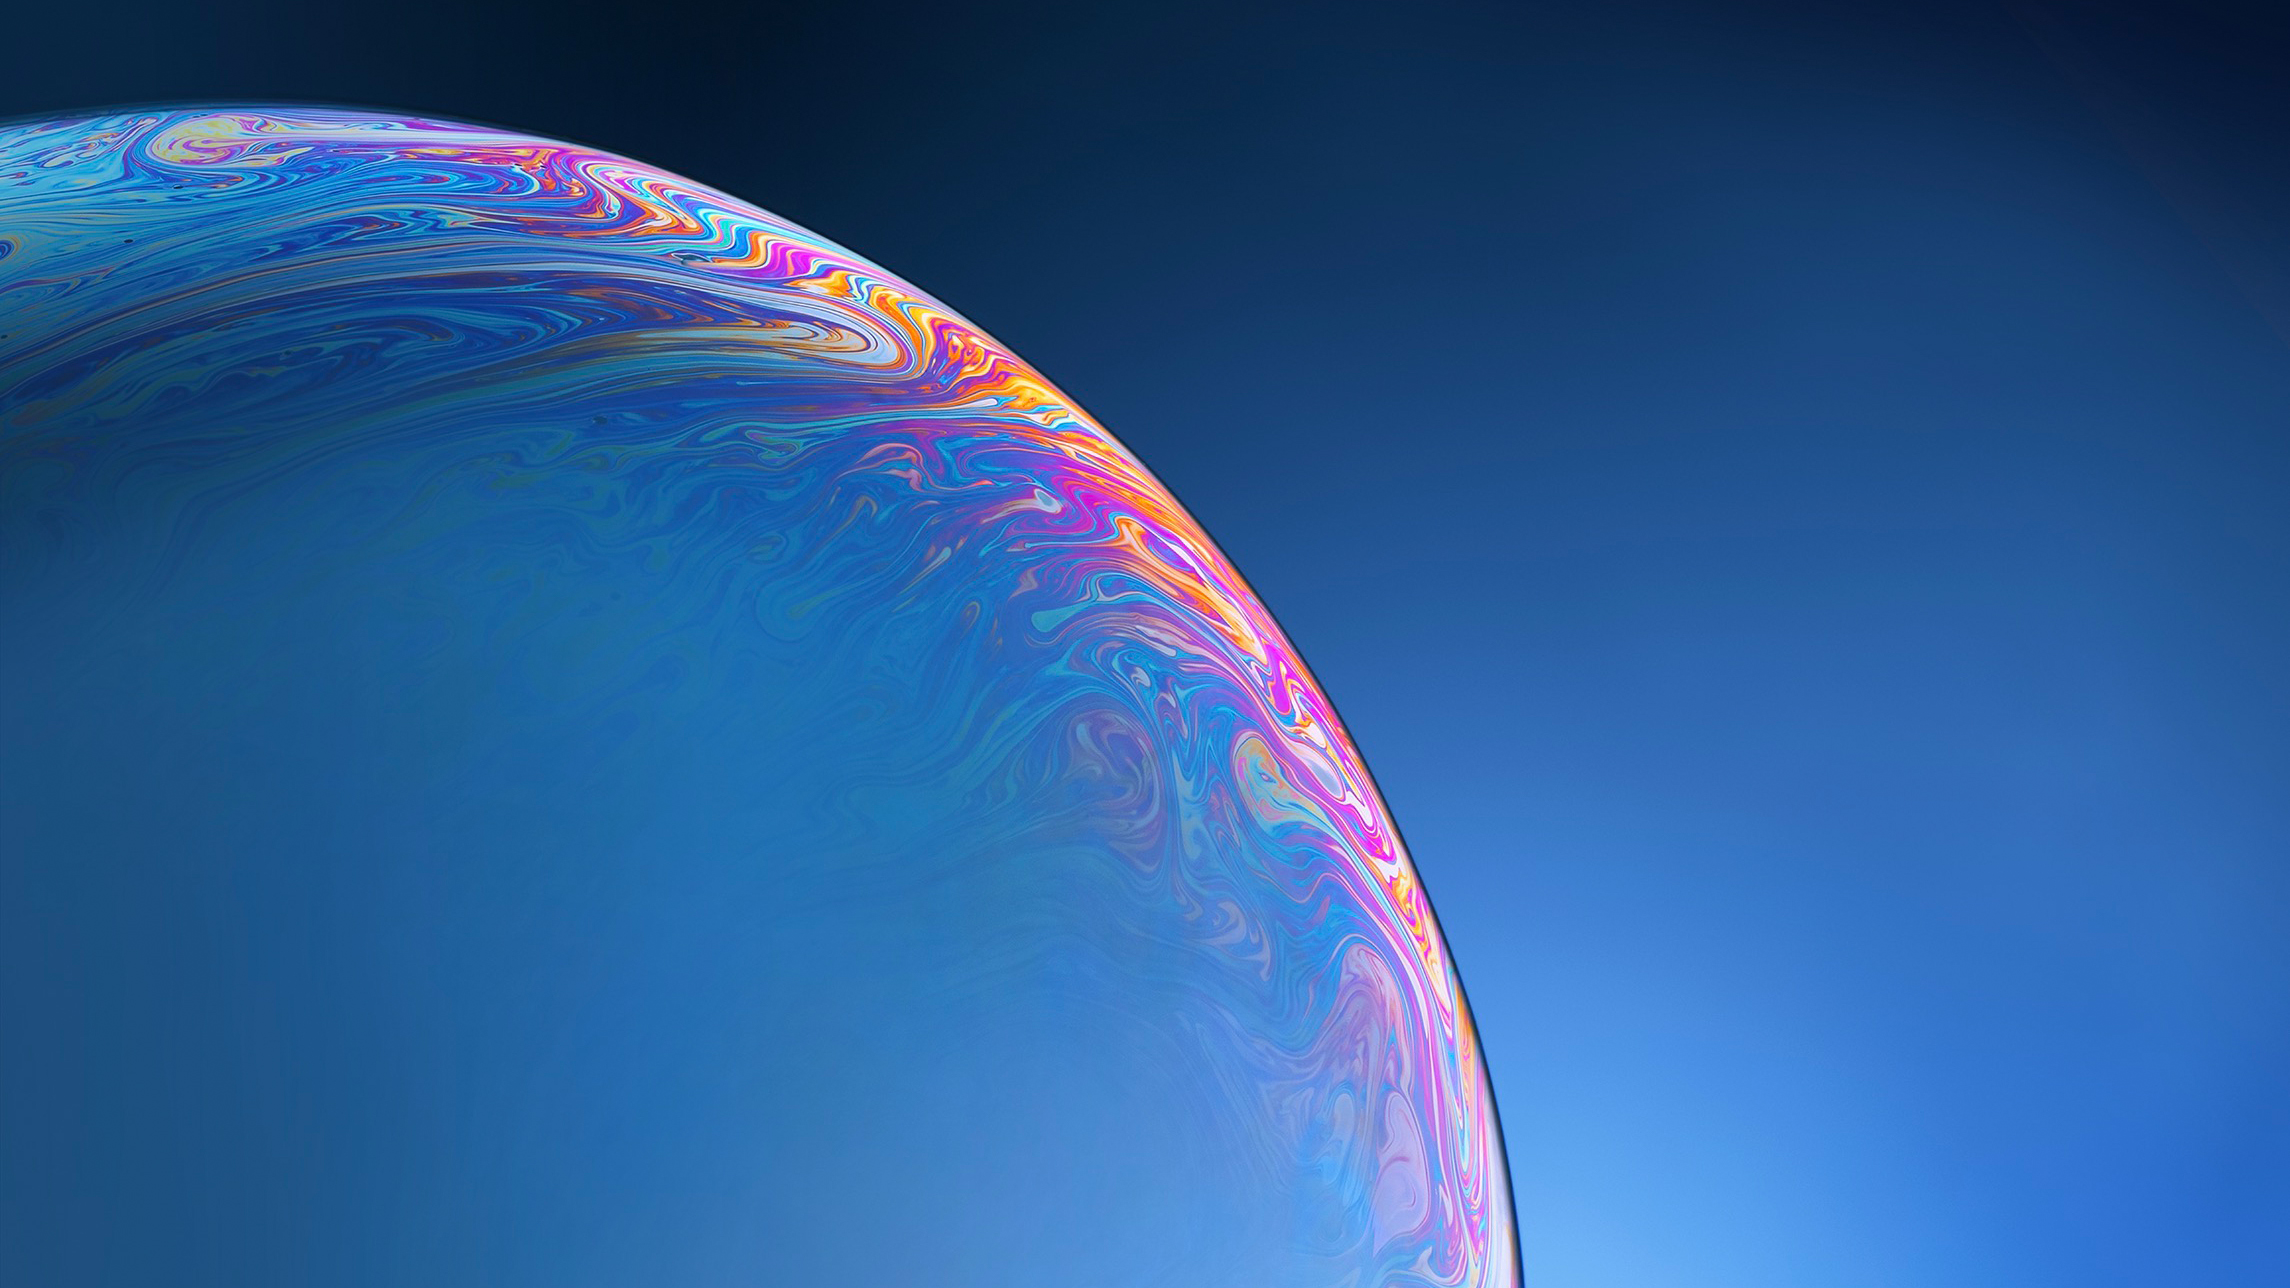 Abstract Bubble 2290x1288